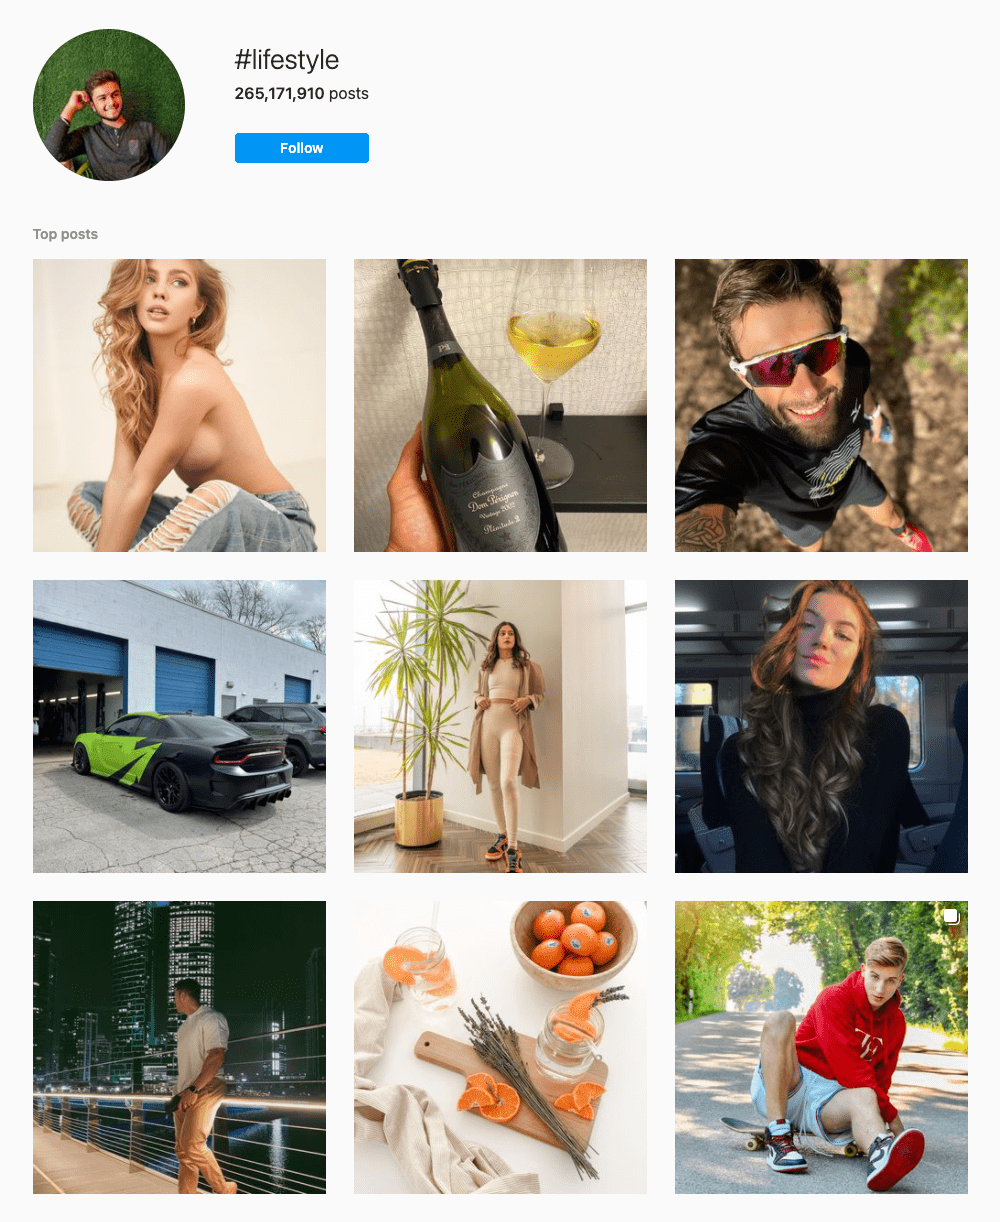 #lifestyle Hashtags for Instagram